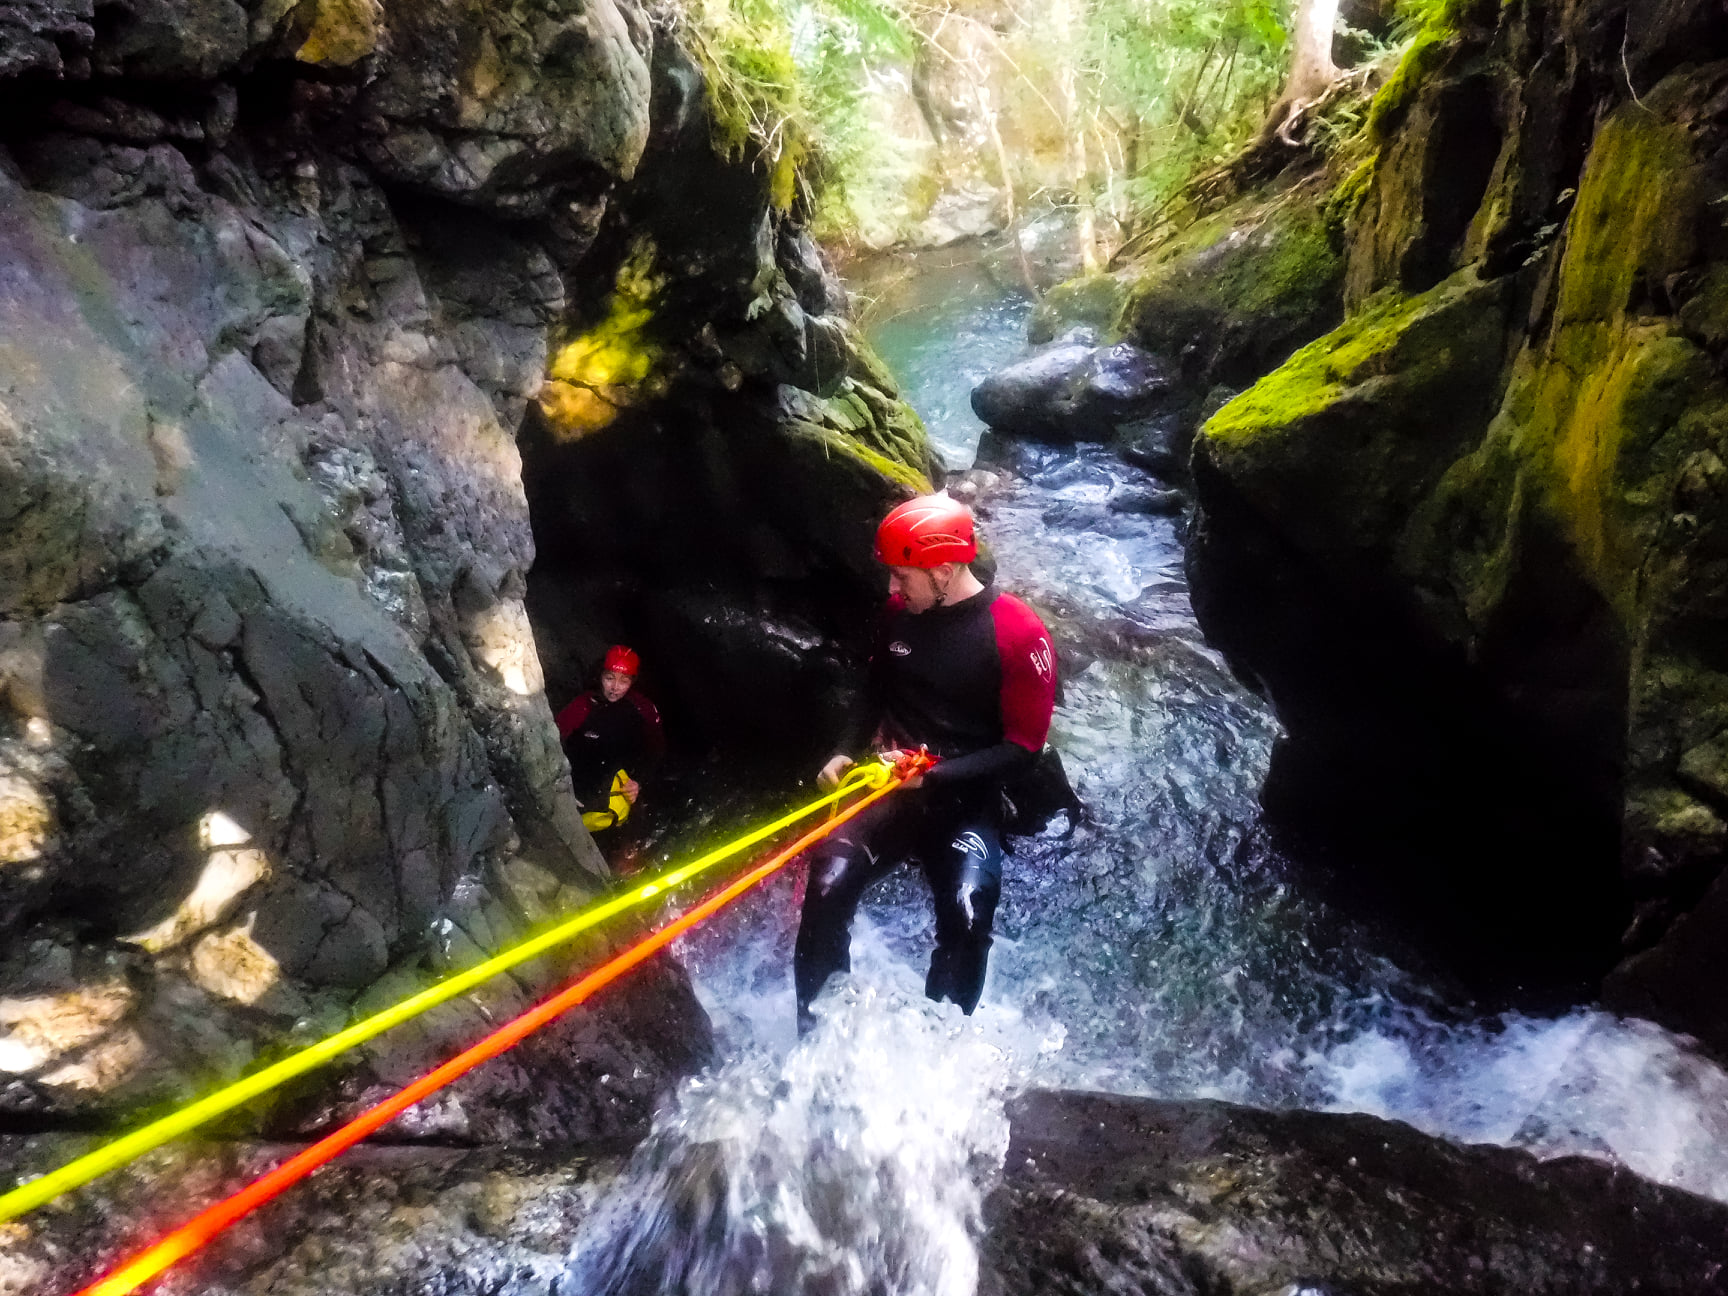 Abseiling down a waterfall during canyoning